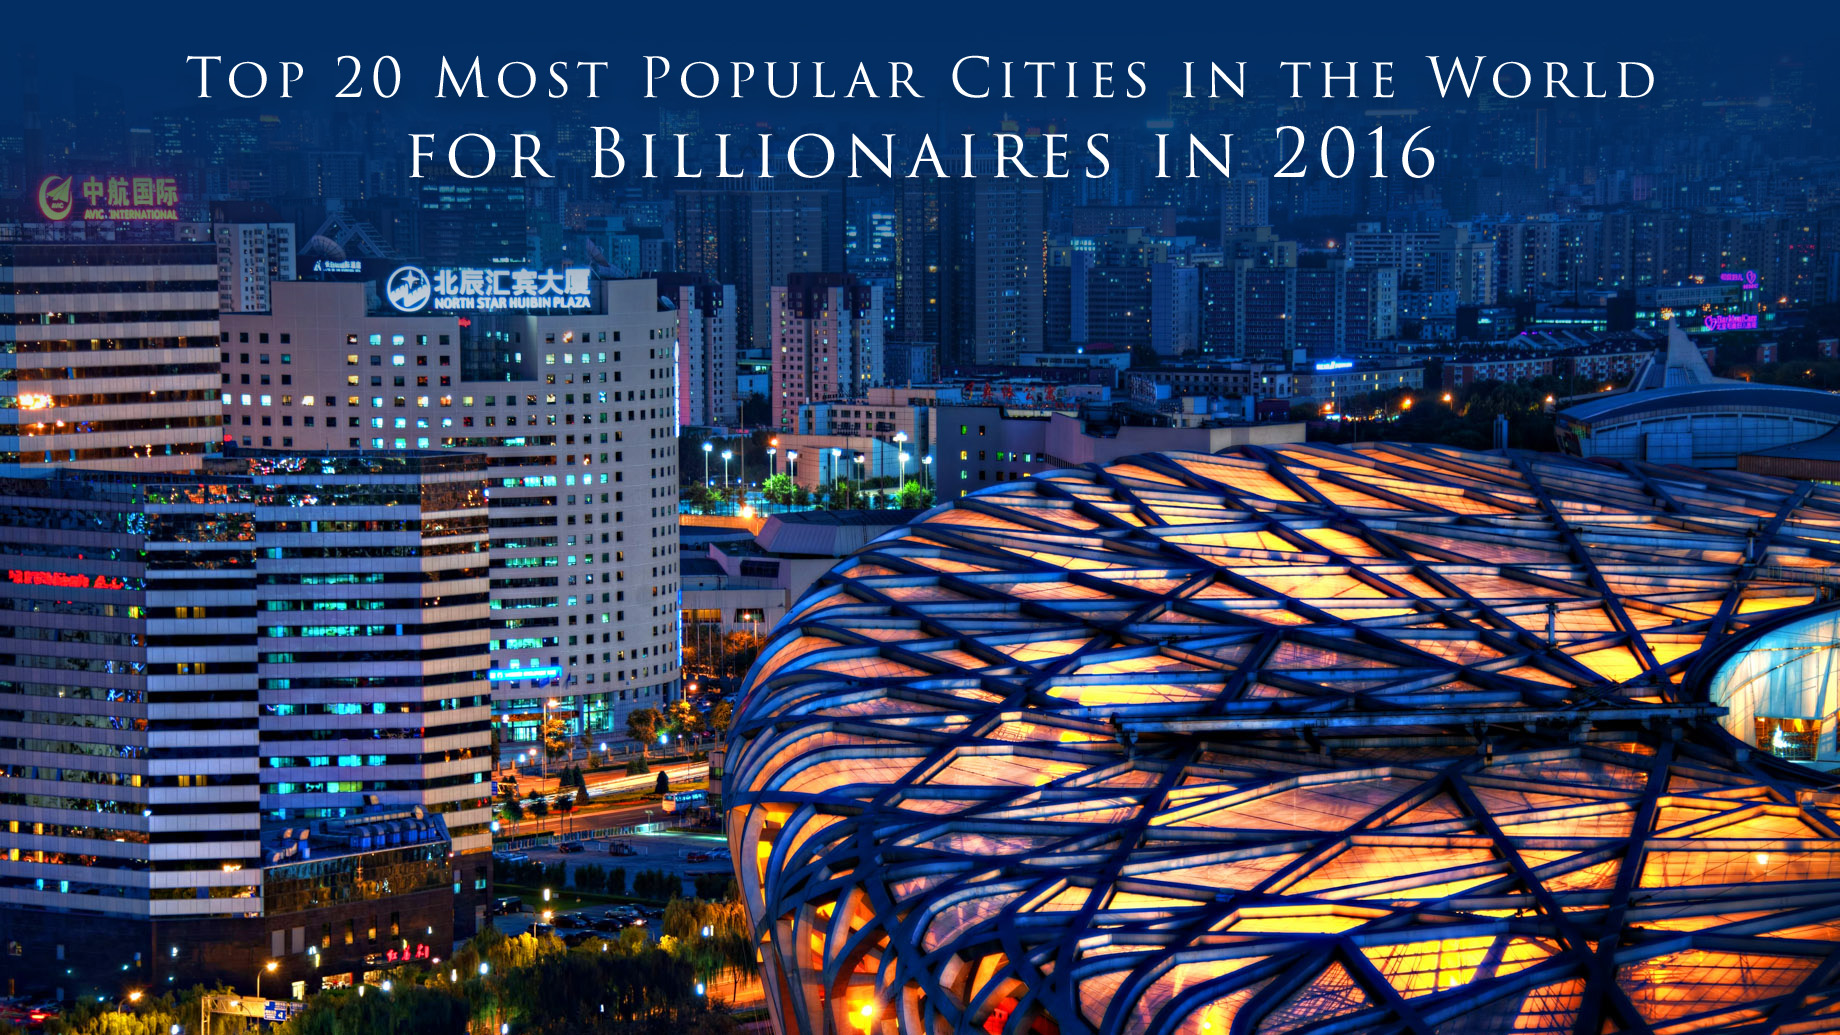 Top 20 Most Popular Cities in the World for Billionaires in 2016